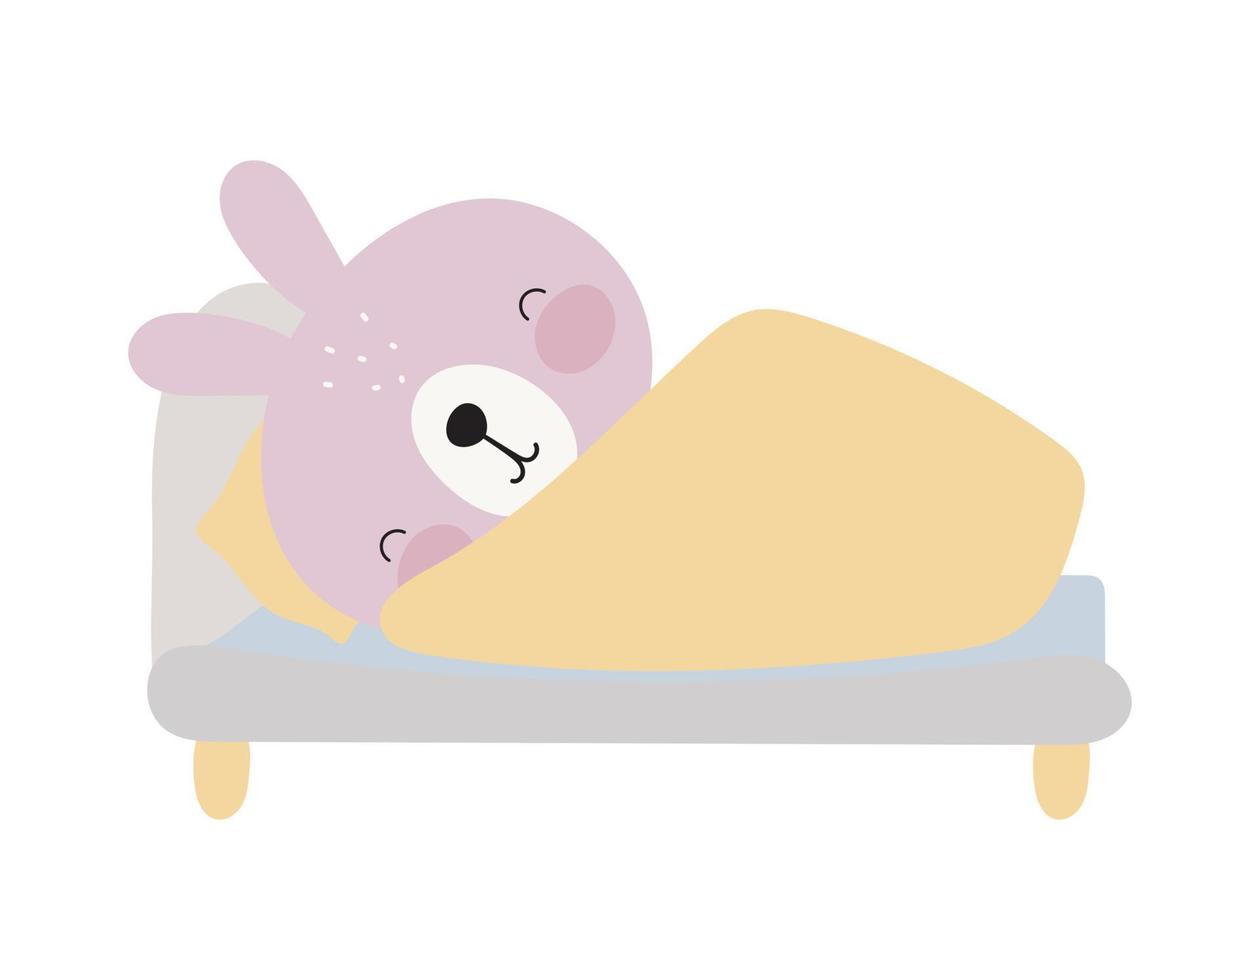 Cute Rabbit is sleeping. Vector illustration. For kids stuff, card, posters, banners, children books, printing on the pack, printing on clothes, fabric, wallpaper, textile.